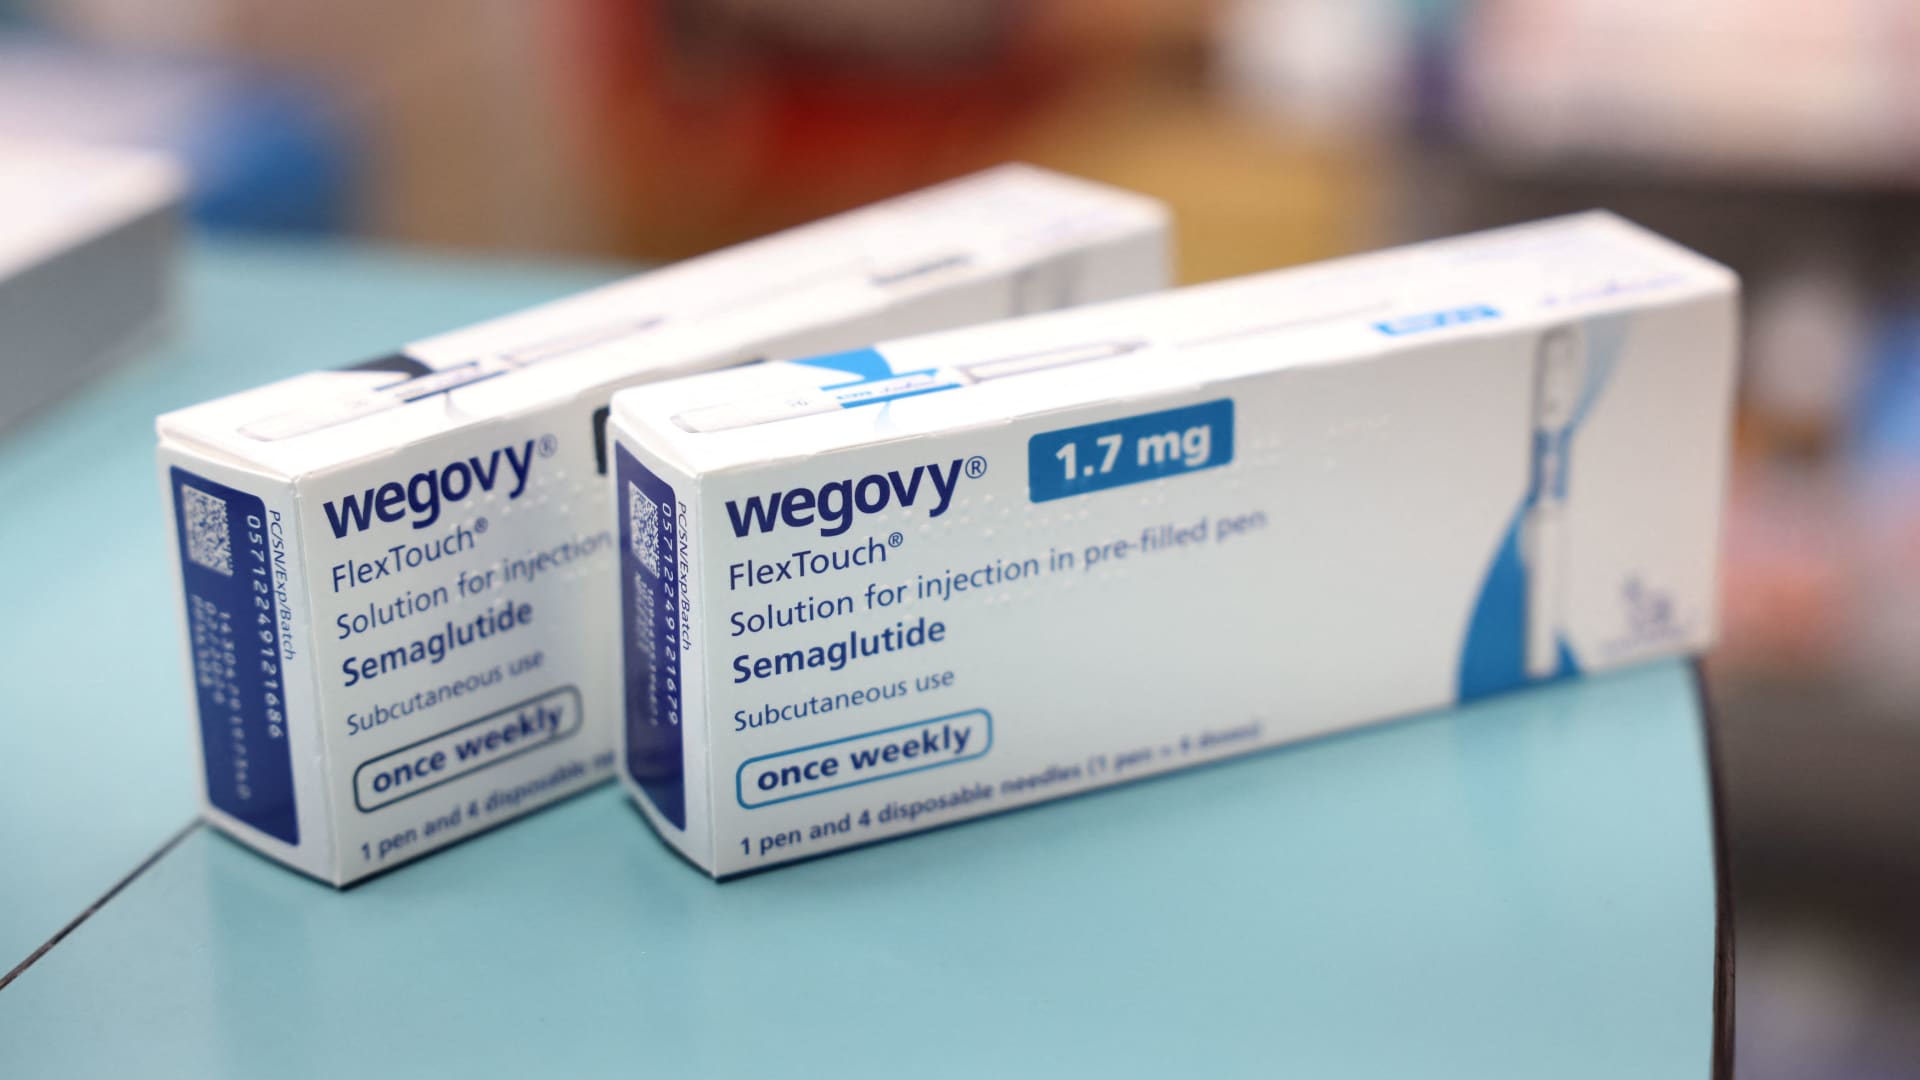 More than 3 million Medicare patients could be eligible for coverage of Wegovy to reduce heart disease risks, study says